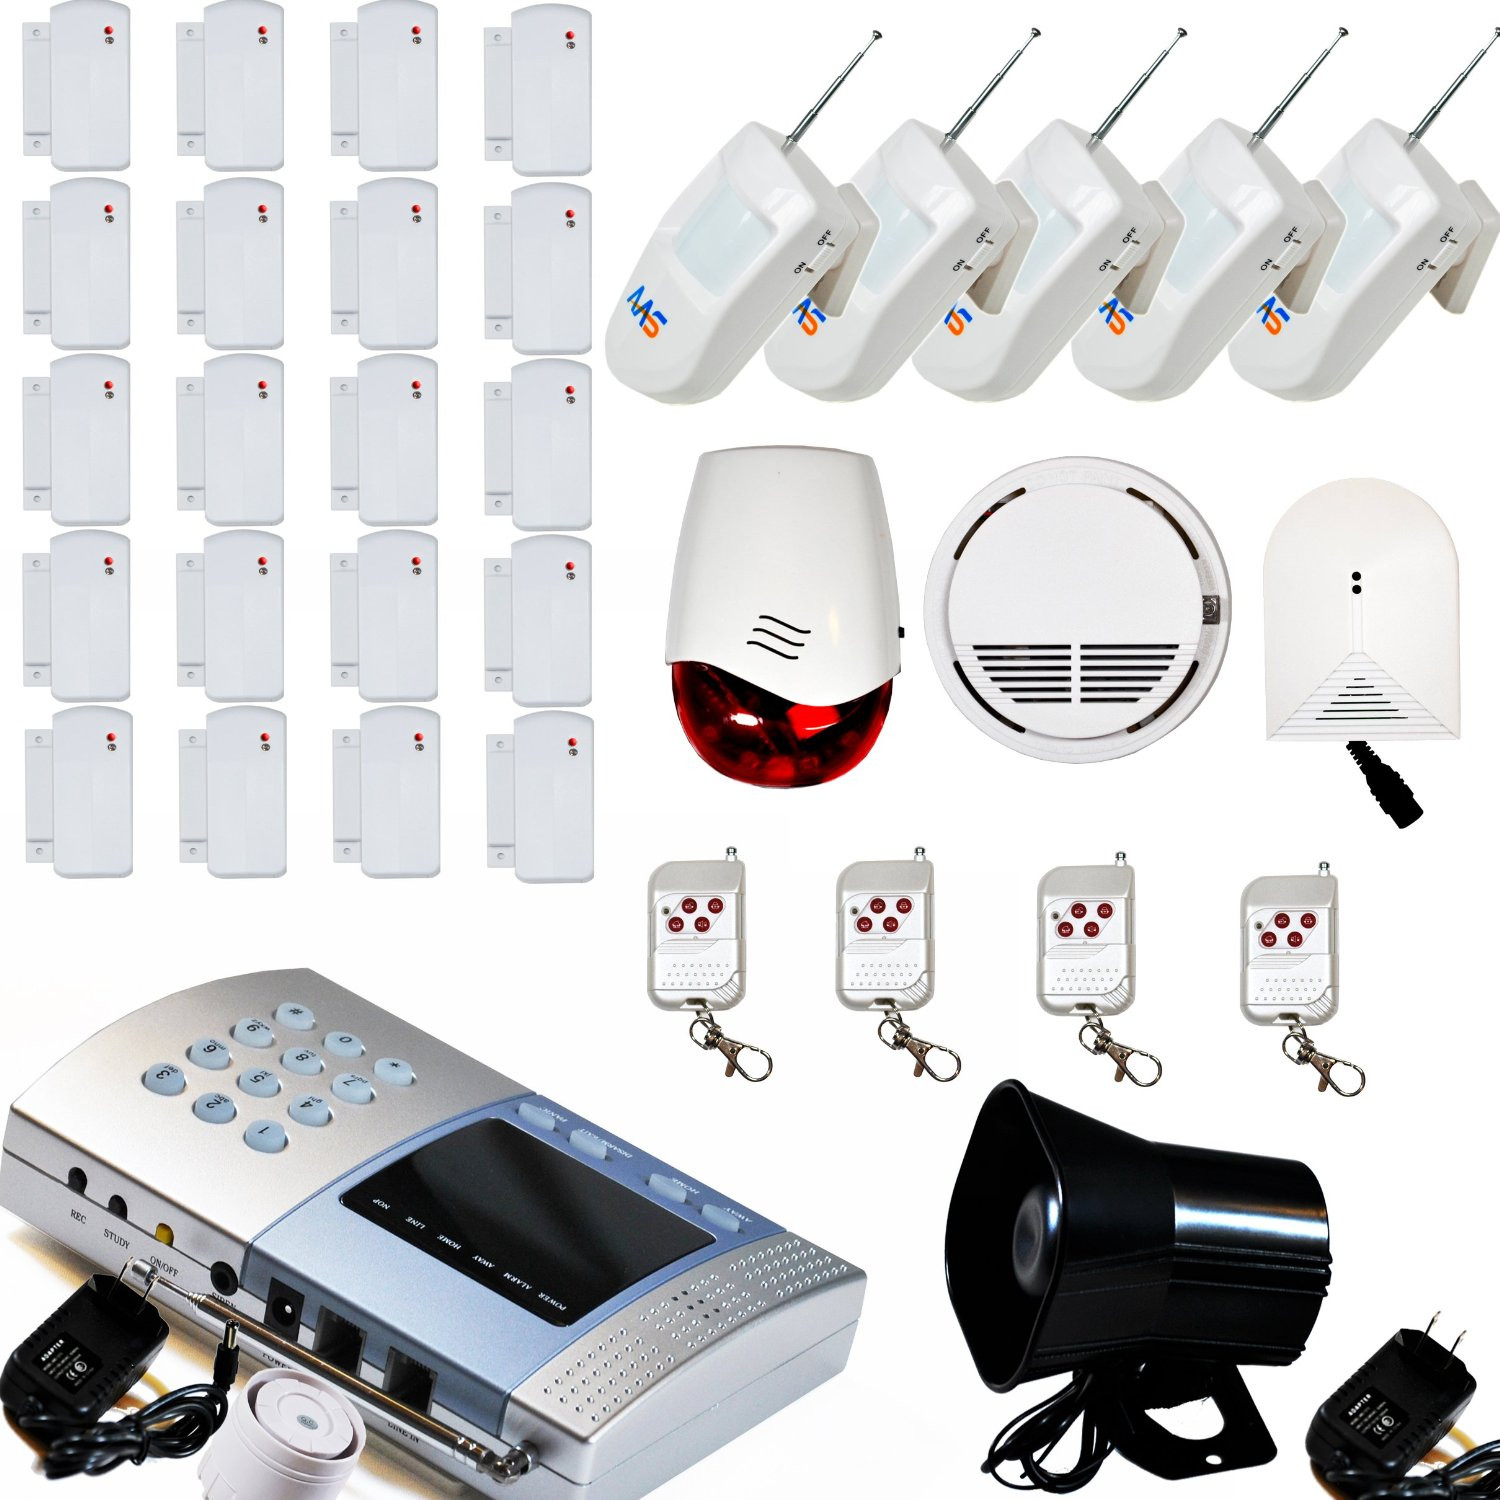 Home Security Systems DIY
 AAS V600 Wireless Home Security Alarm System Kit DIY